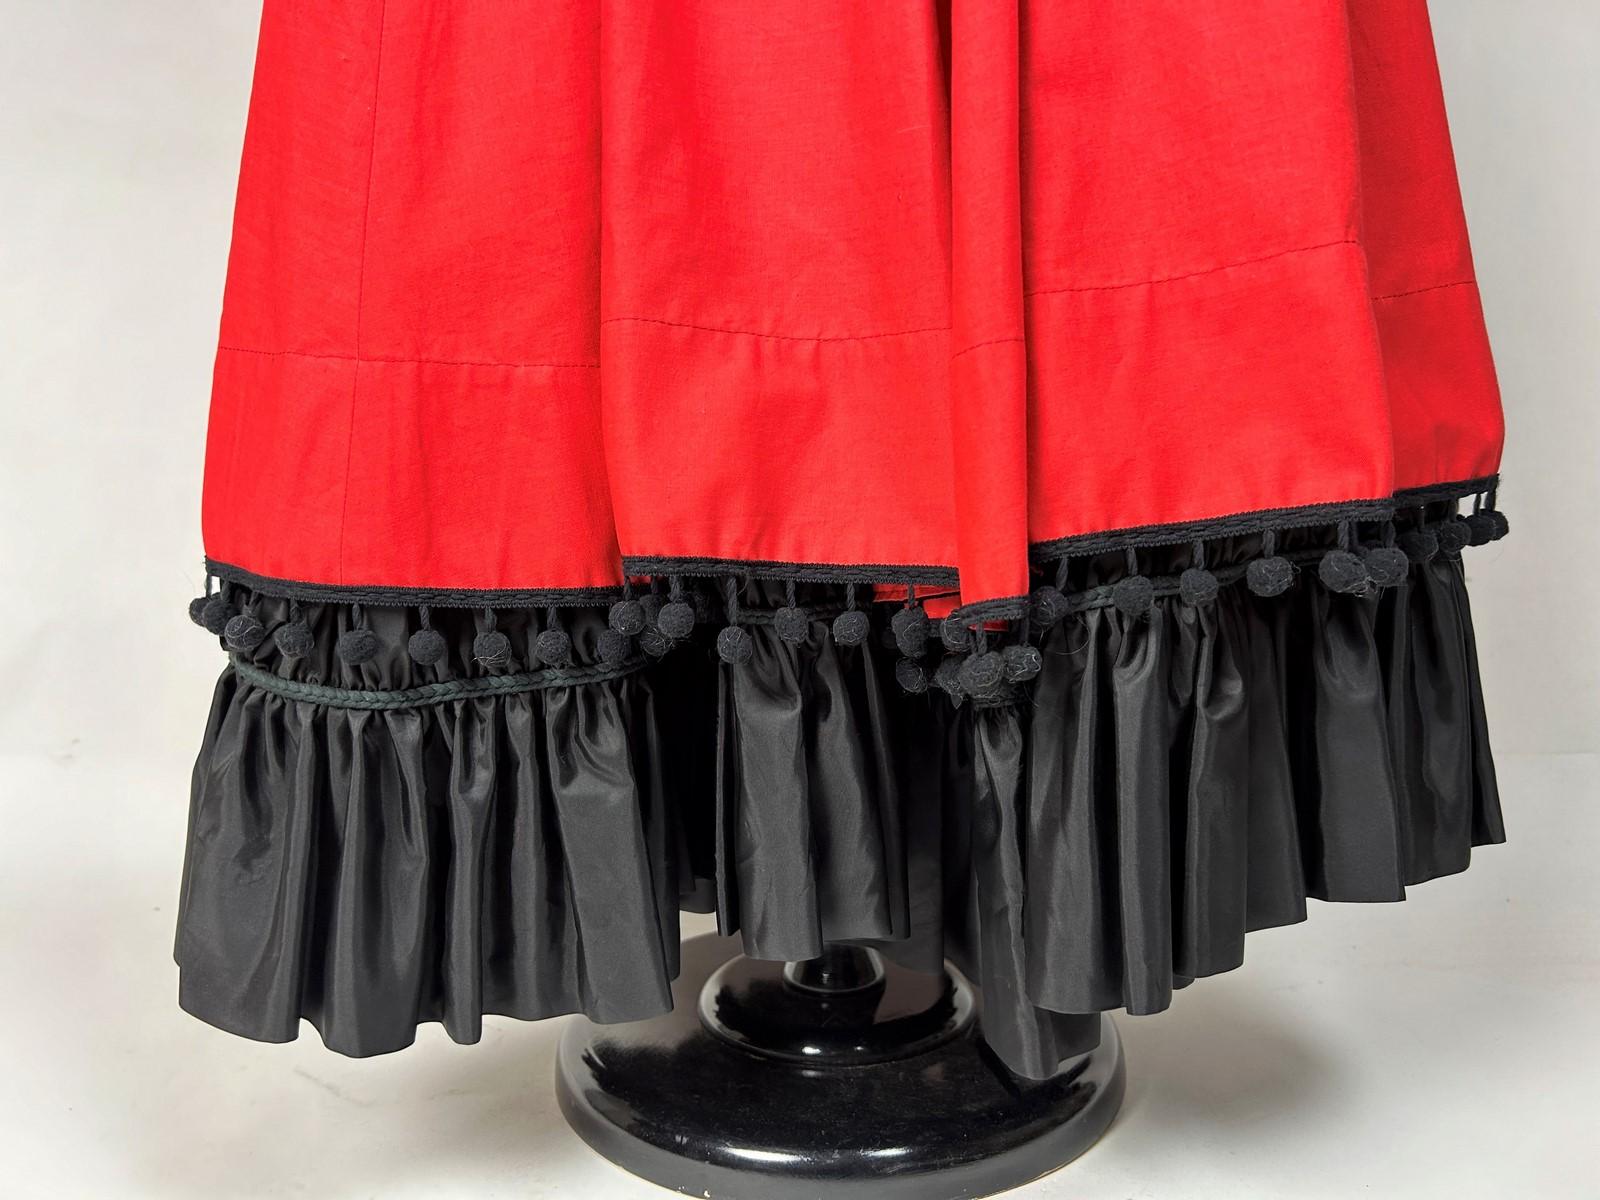 Yves Saint Laurent Rive Gauche, Blouse and skirt - Spring Summer 1977 collection For Sale 2